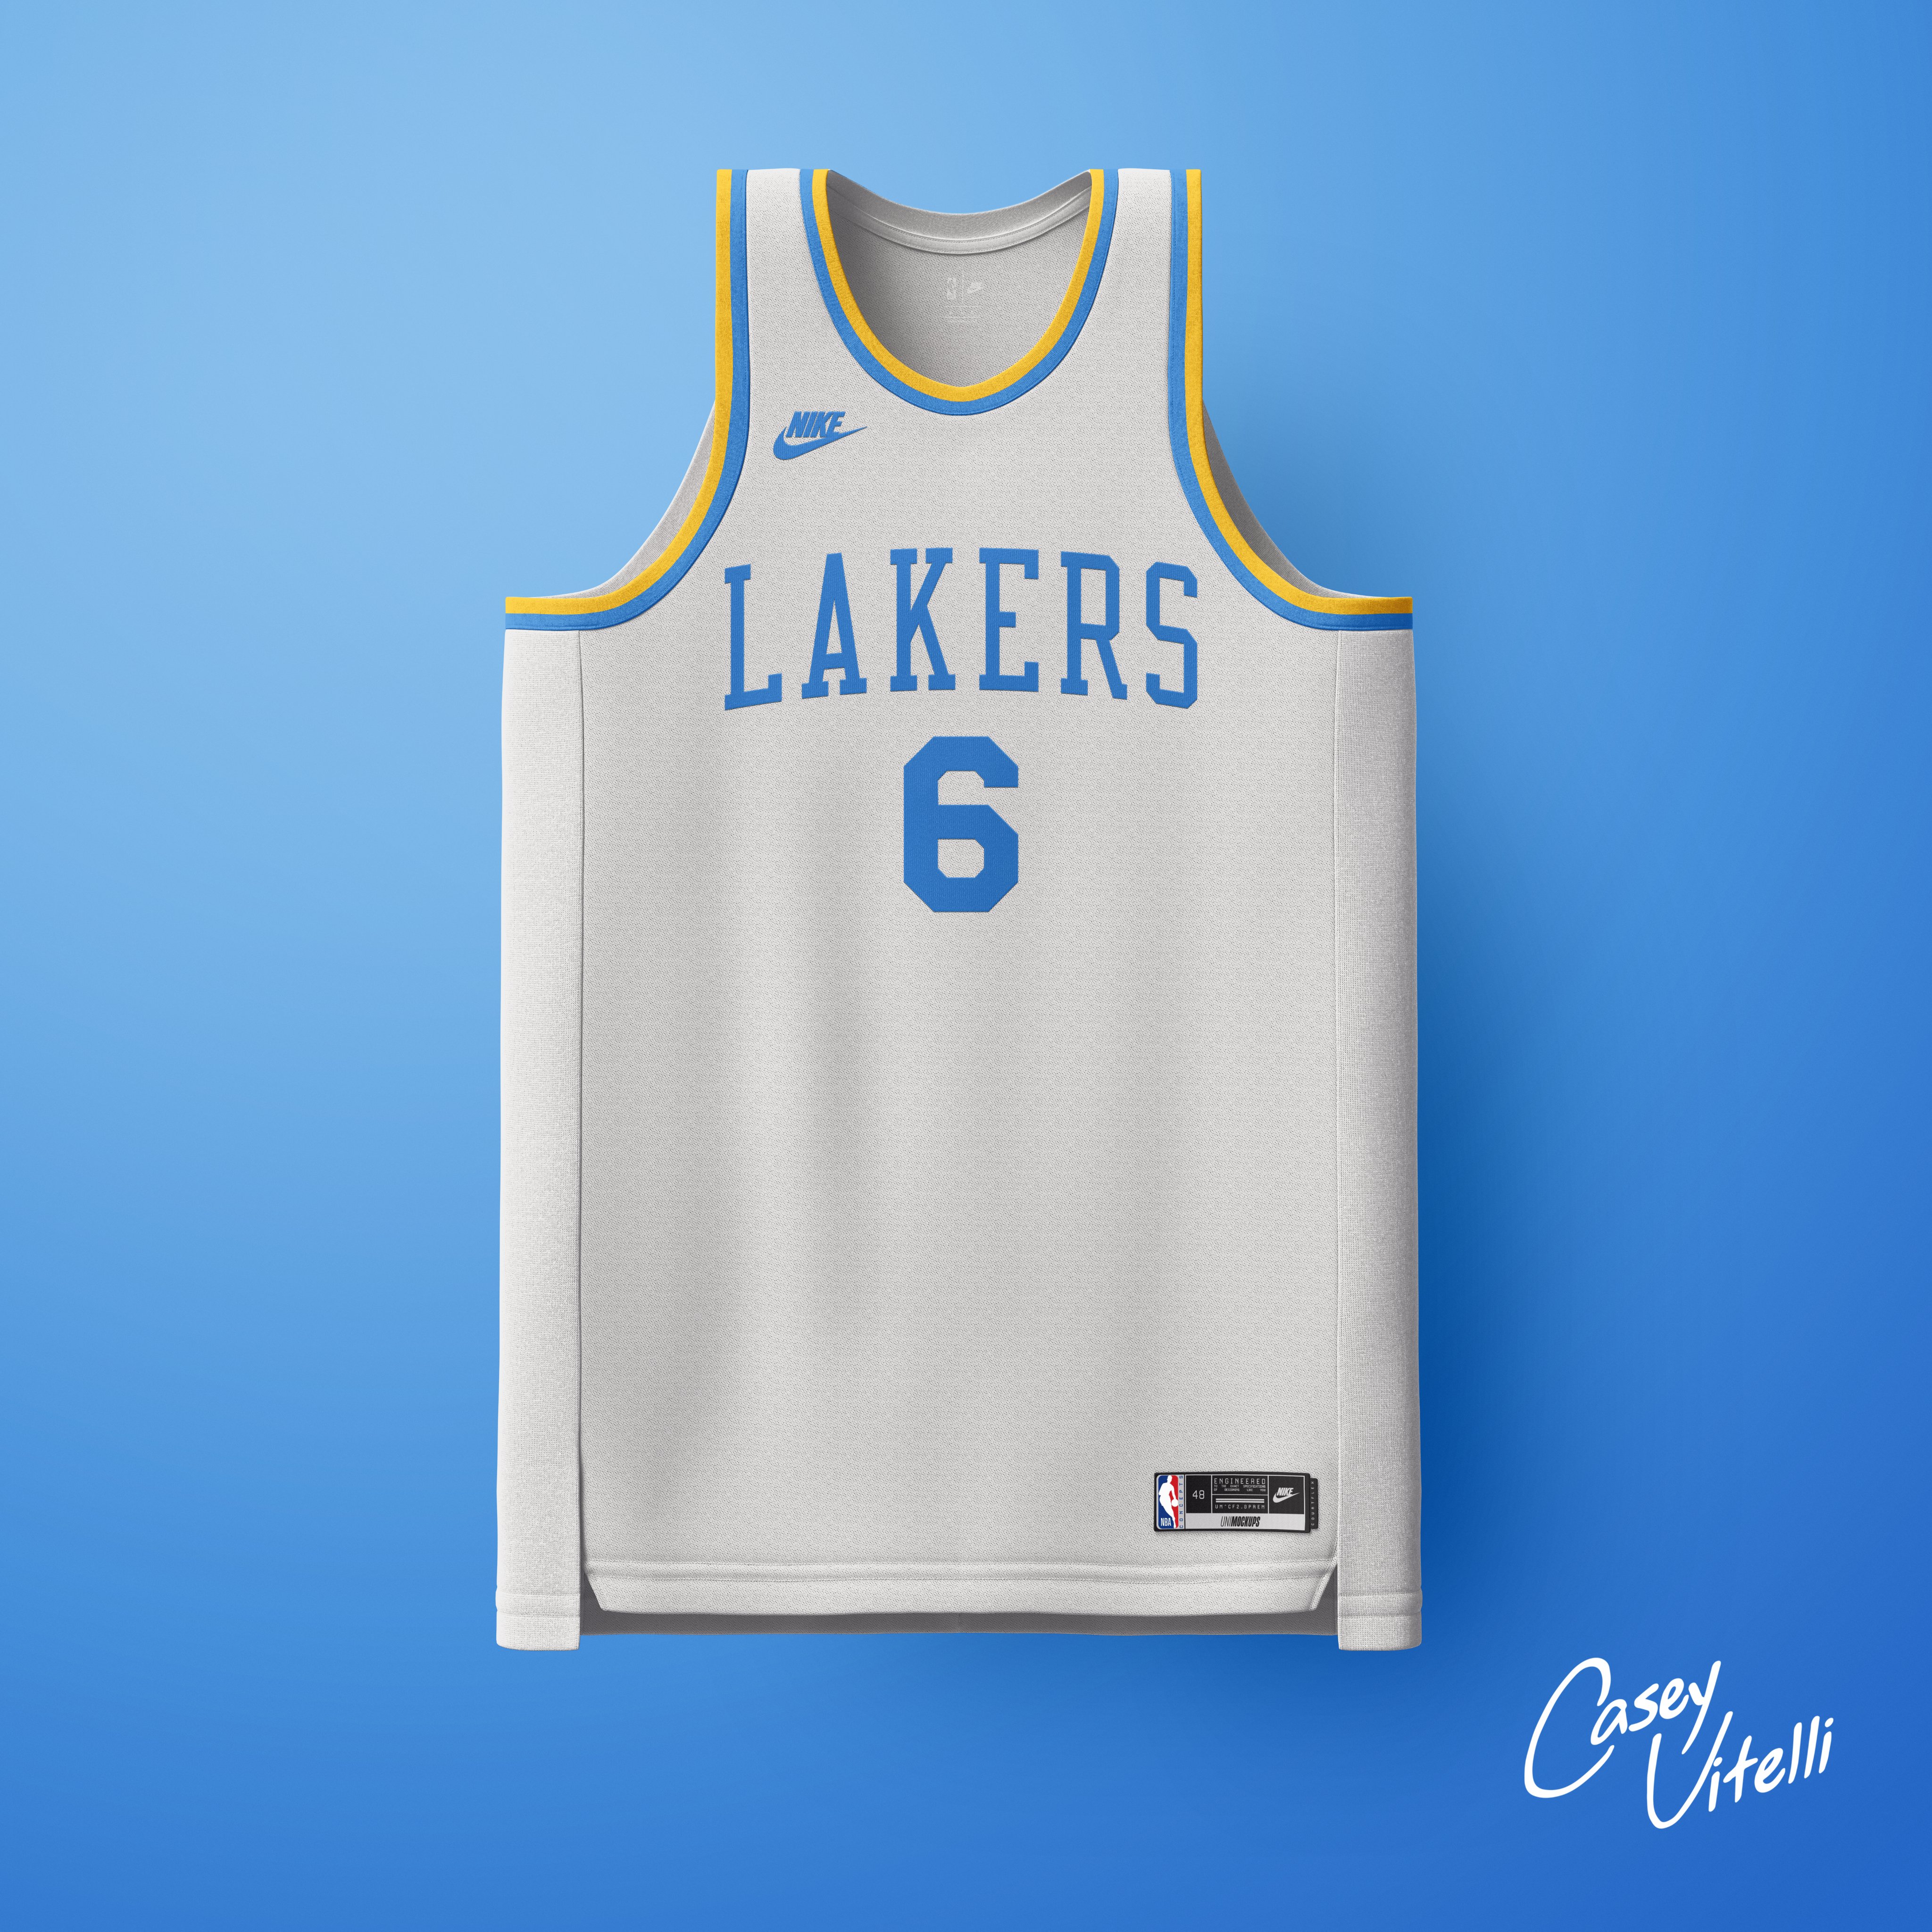 Version of the Pels “City Edition” jersey for next season from Casey  Vitelli on Twitter : r/NOLAPelicans